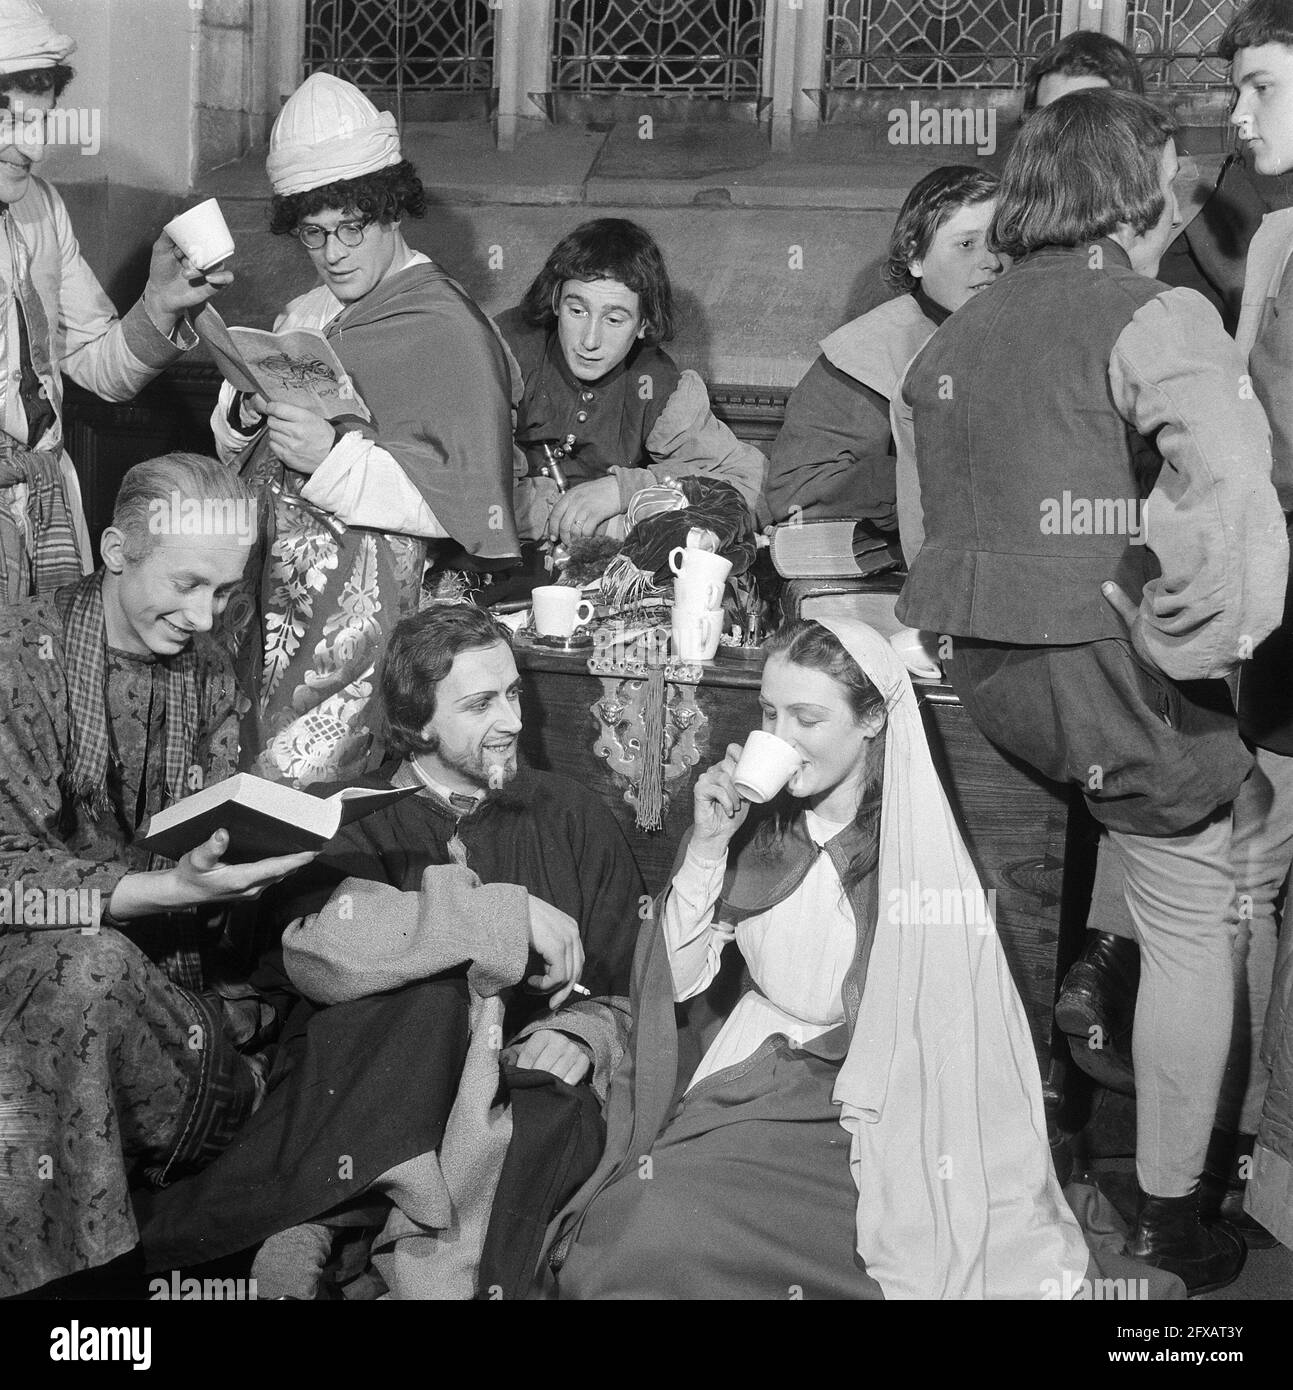 Christmas play in the Grote of St. Bavokerk in Haarlem, December 17, 1945, Christmas play, The Netherlands, 20th century press agency photo, news to remember, documentary, historic photography 1945-1990, visual stories, human history of the Twentieth Century, capturing moments in time Stock Photo